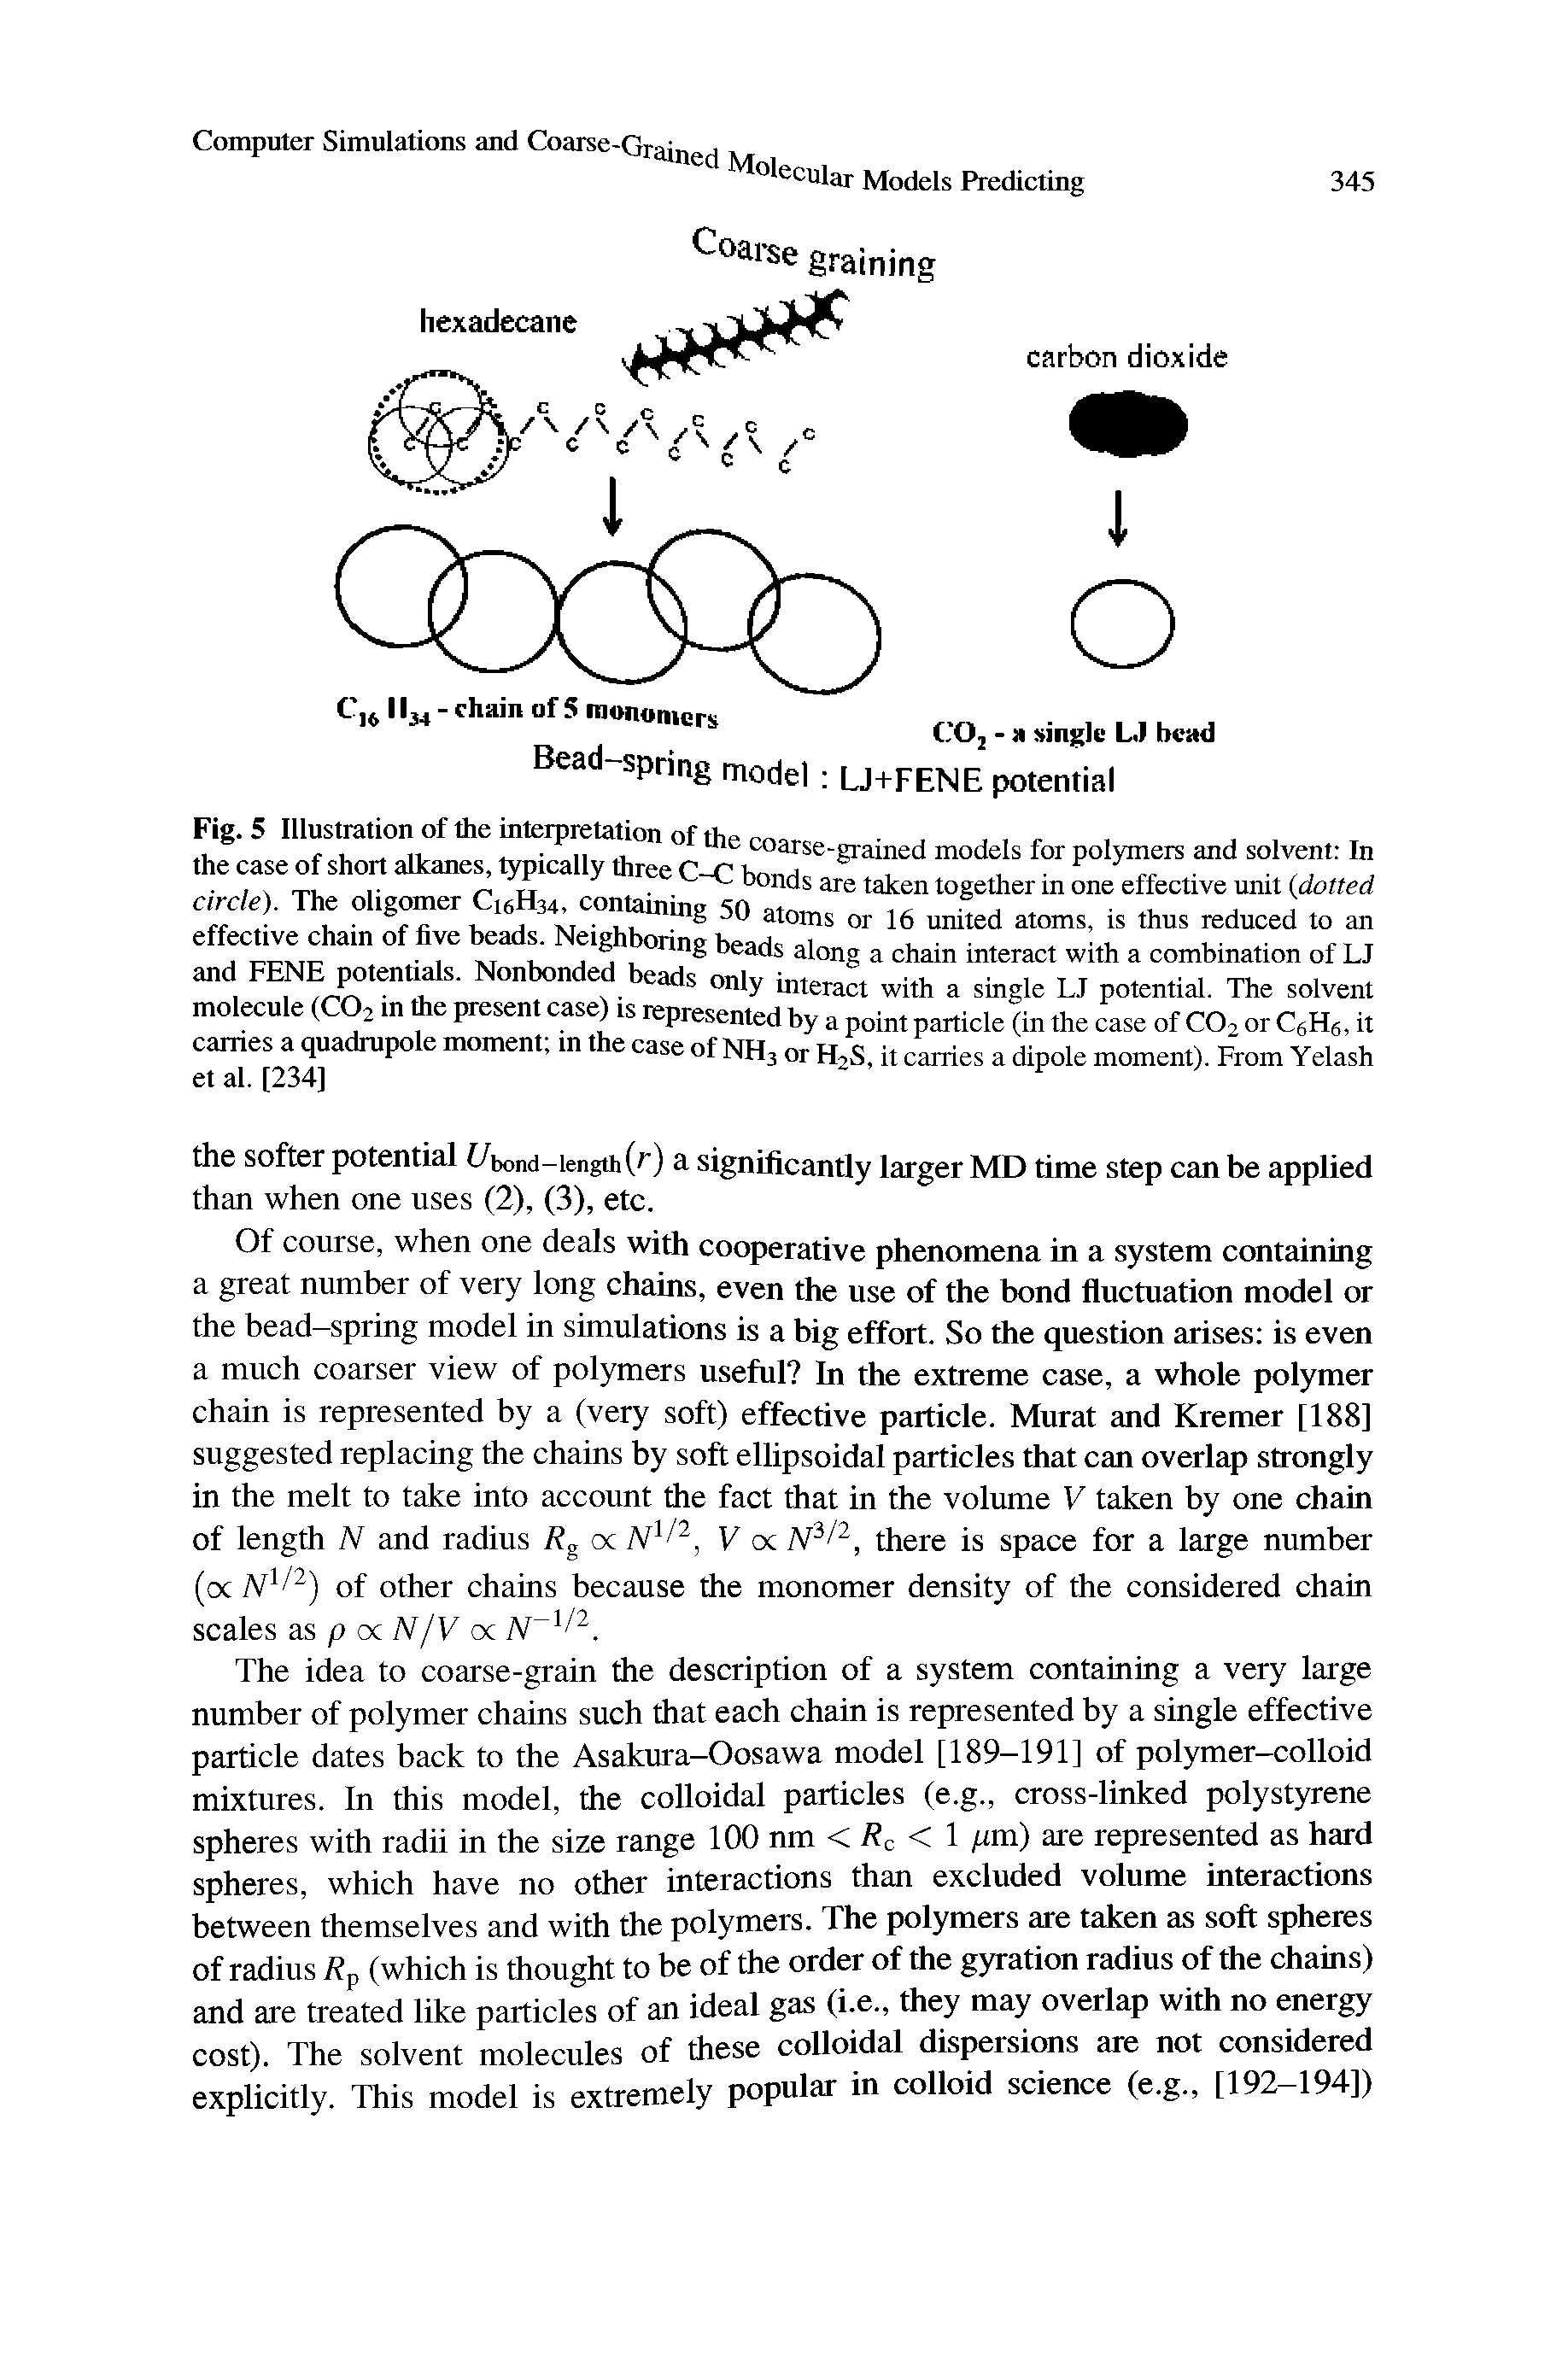 Fig. 5 Illustration of the intemrntation of the coarse-grained models for polymers and solvent In the case of short alkane typically threeC-C bonds are taken together in L effective unit (dotted arcle). The oligomer Q5H34 Cont u,g 50 toms or 16 united atoms, is thus rnduced to an ° XT y 4 4 onng beads along a chain interact with a combination of LJ...